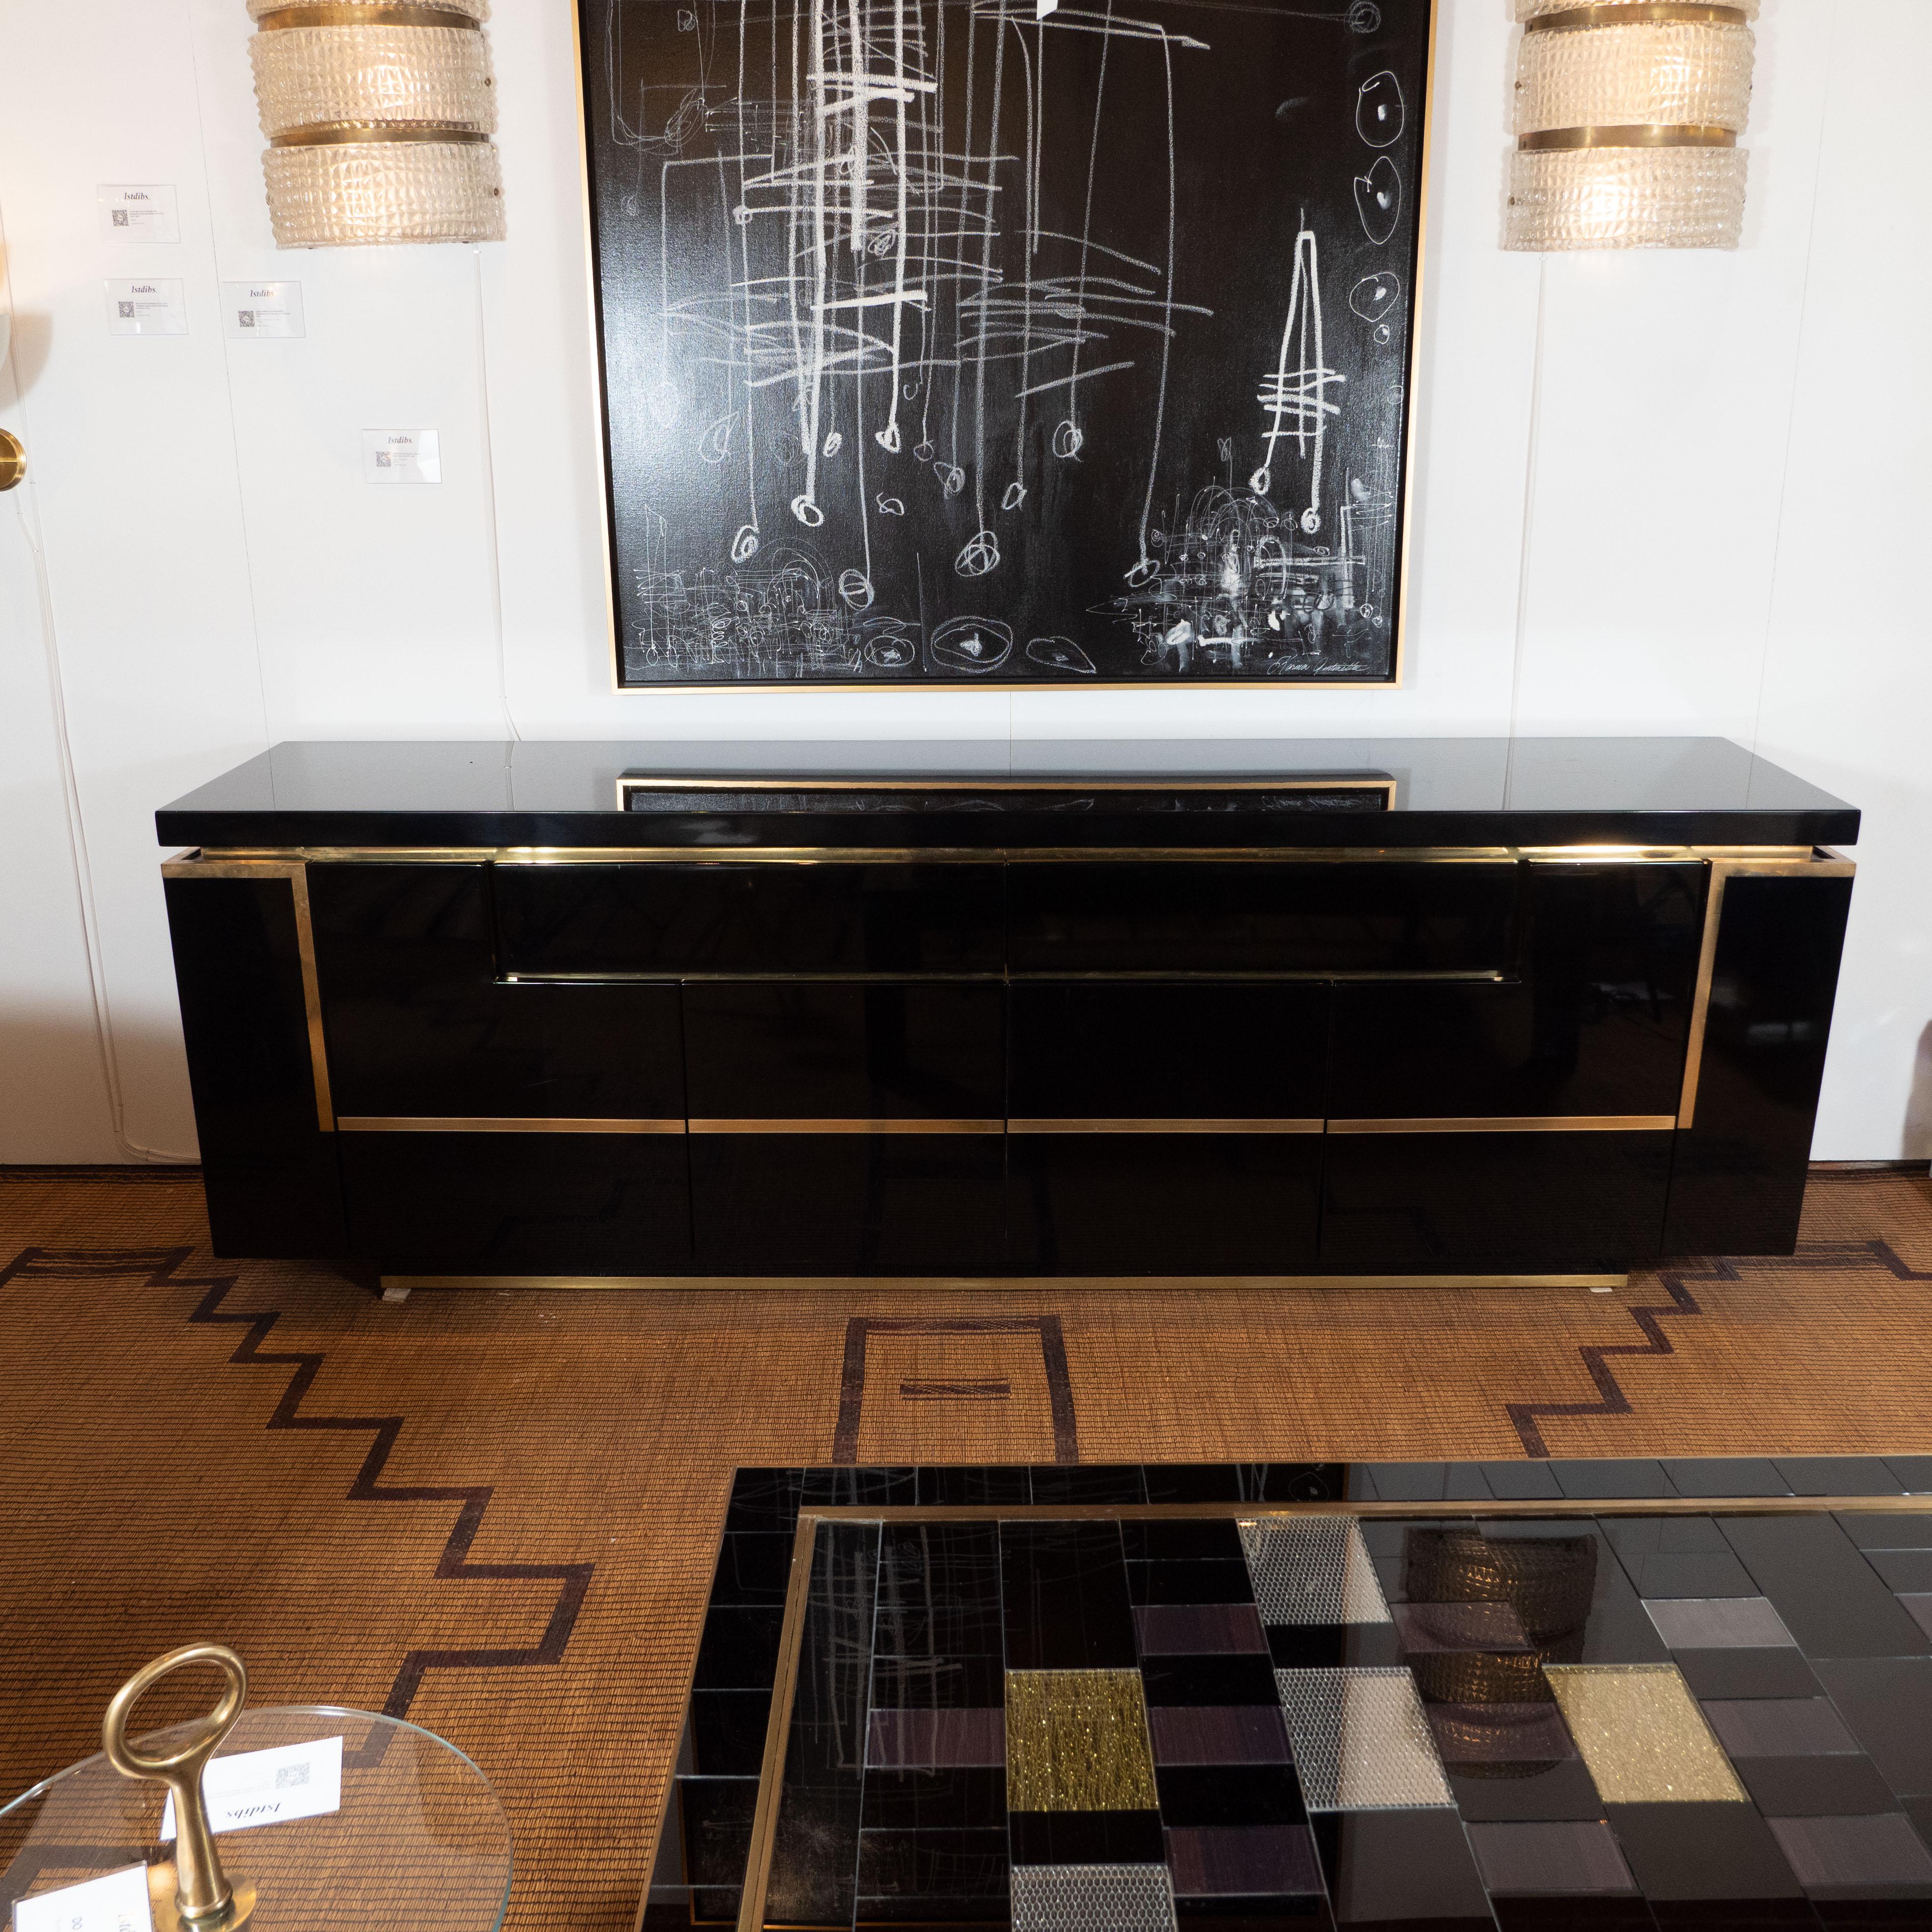 This black lacquered and brass sideboard or credenza was designed and handcrafted by Jean Claude Mahey in France, circa 1970. It is a fabulous and unique piece not only for its clean design and craftsmanship but also for the condition it is in. Made